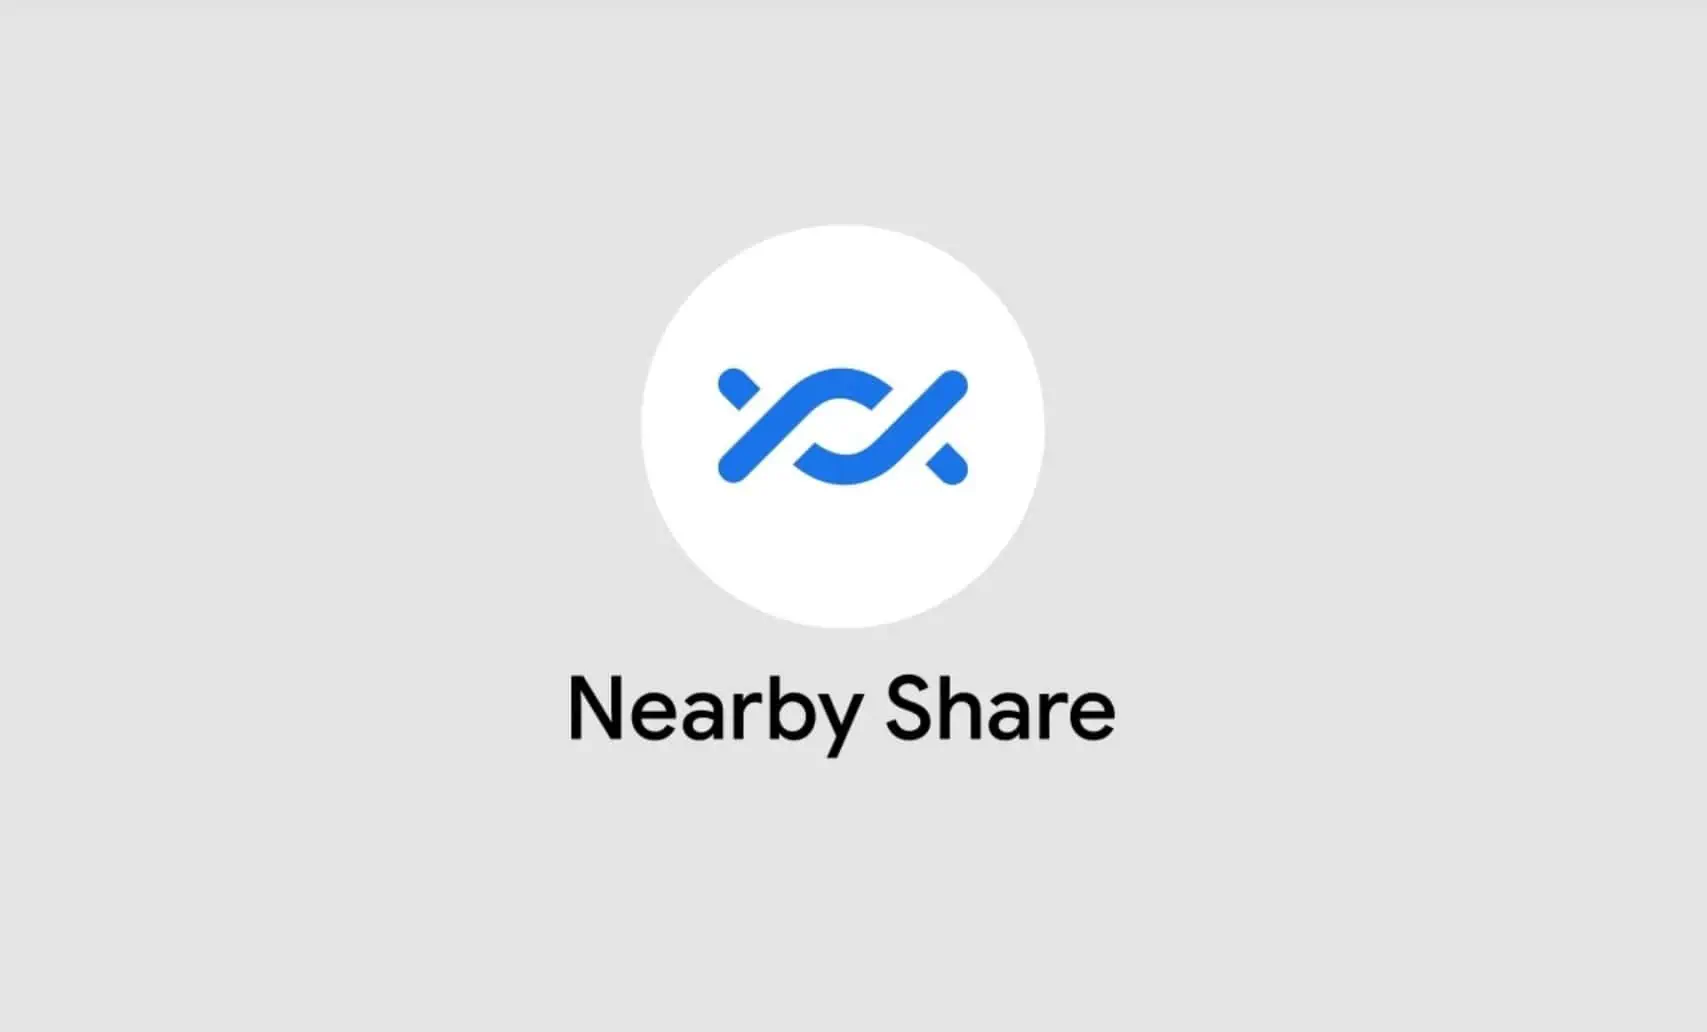 Google is getting ready to expand Nearby Share with group transfers